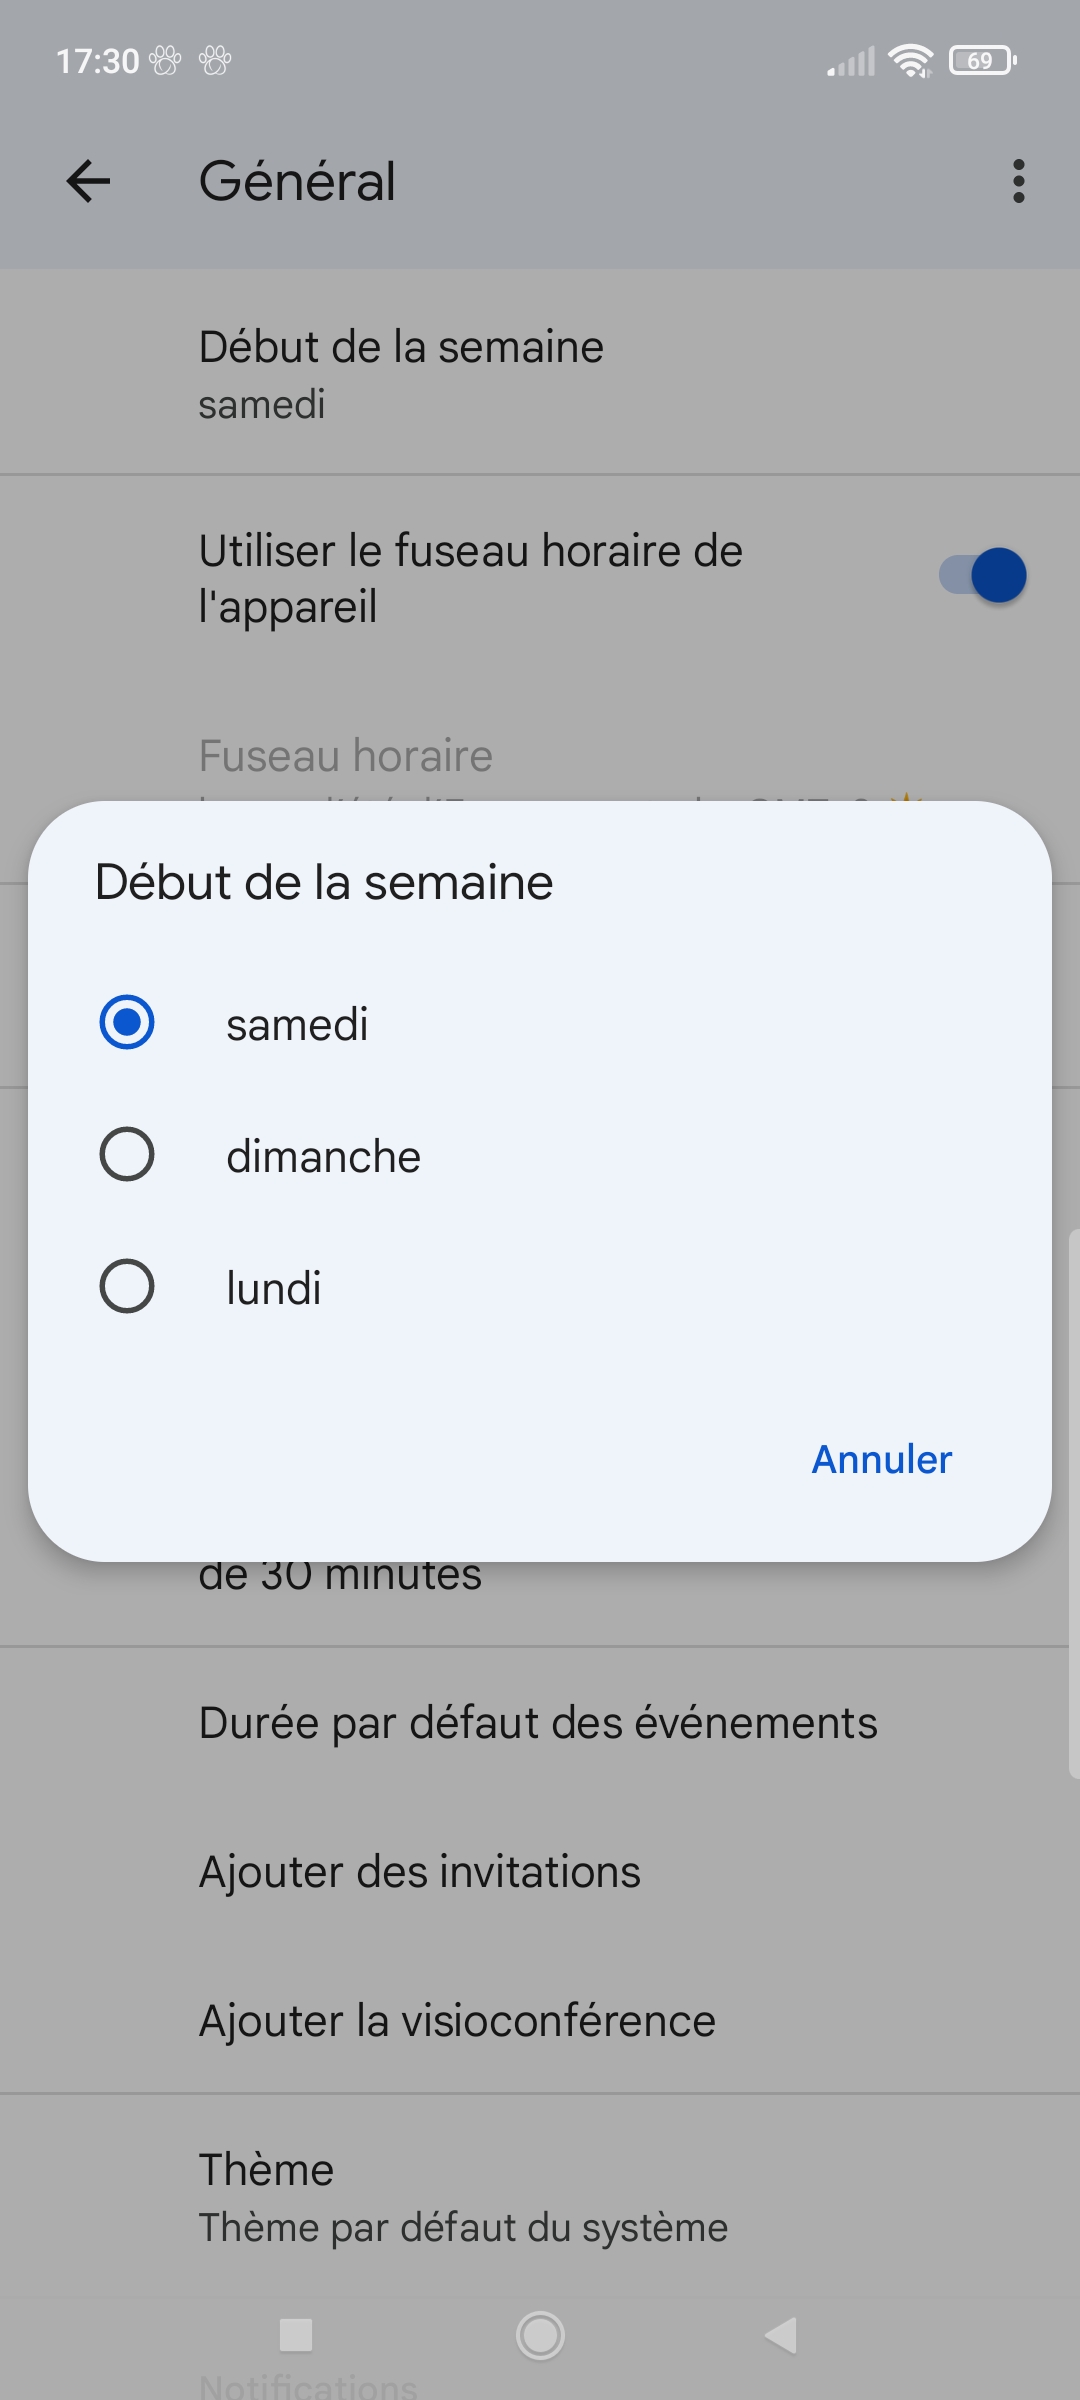 How to choose the 1st day of the week in Google Calendar? Techzle